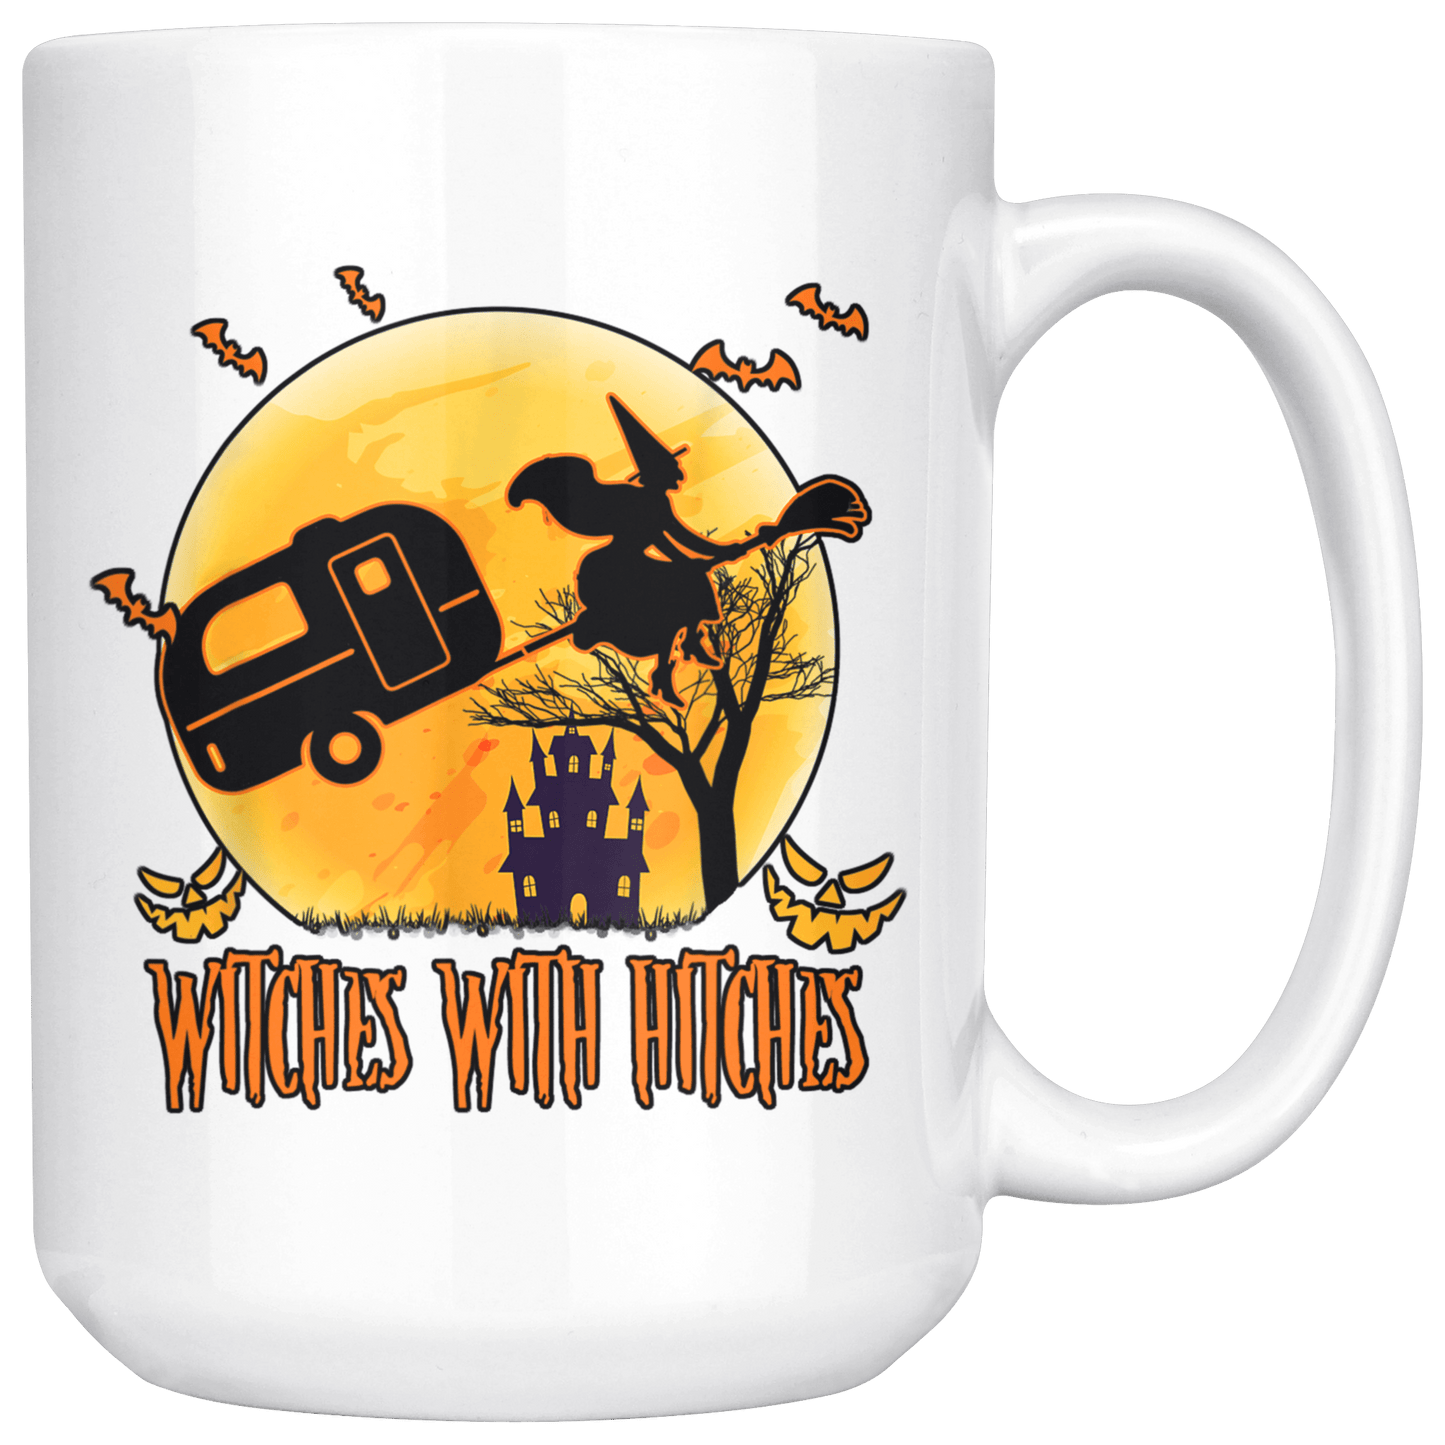 Funny "Witches With Hitches" Halloween Camping Mug